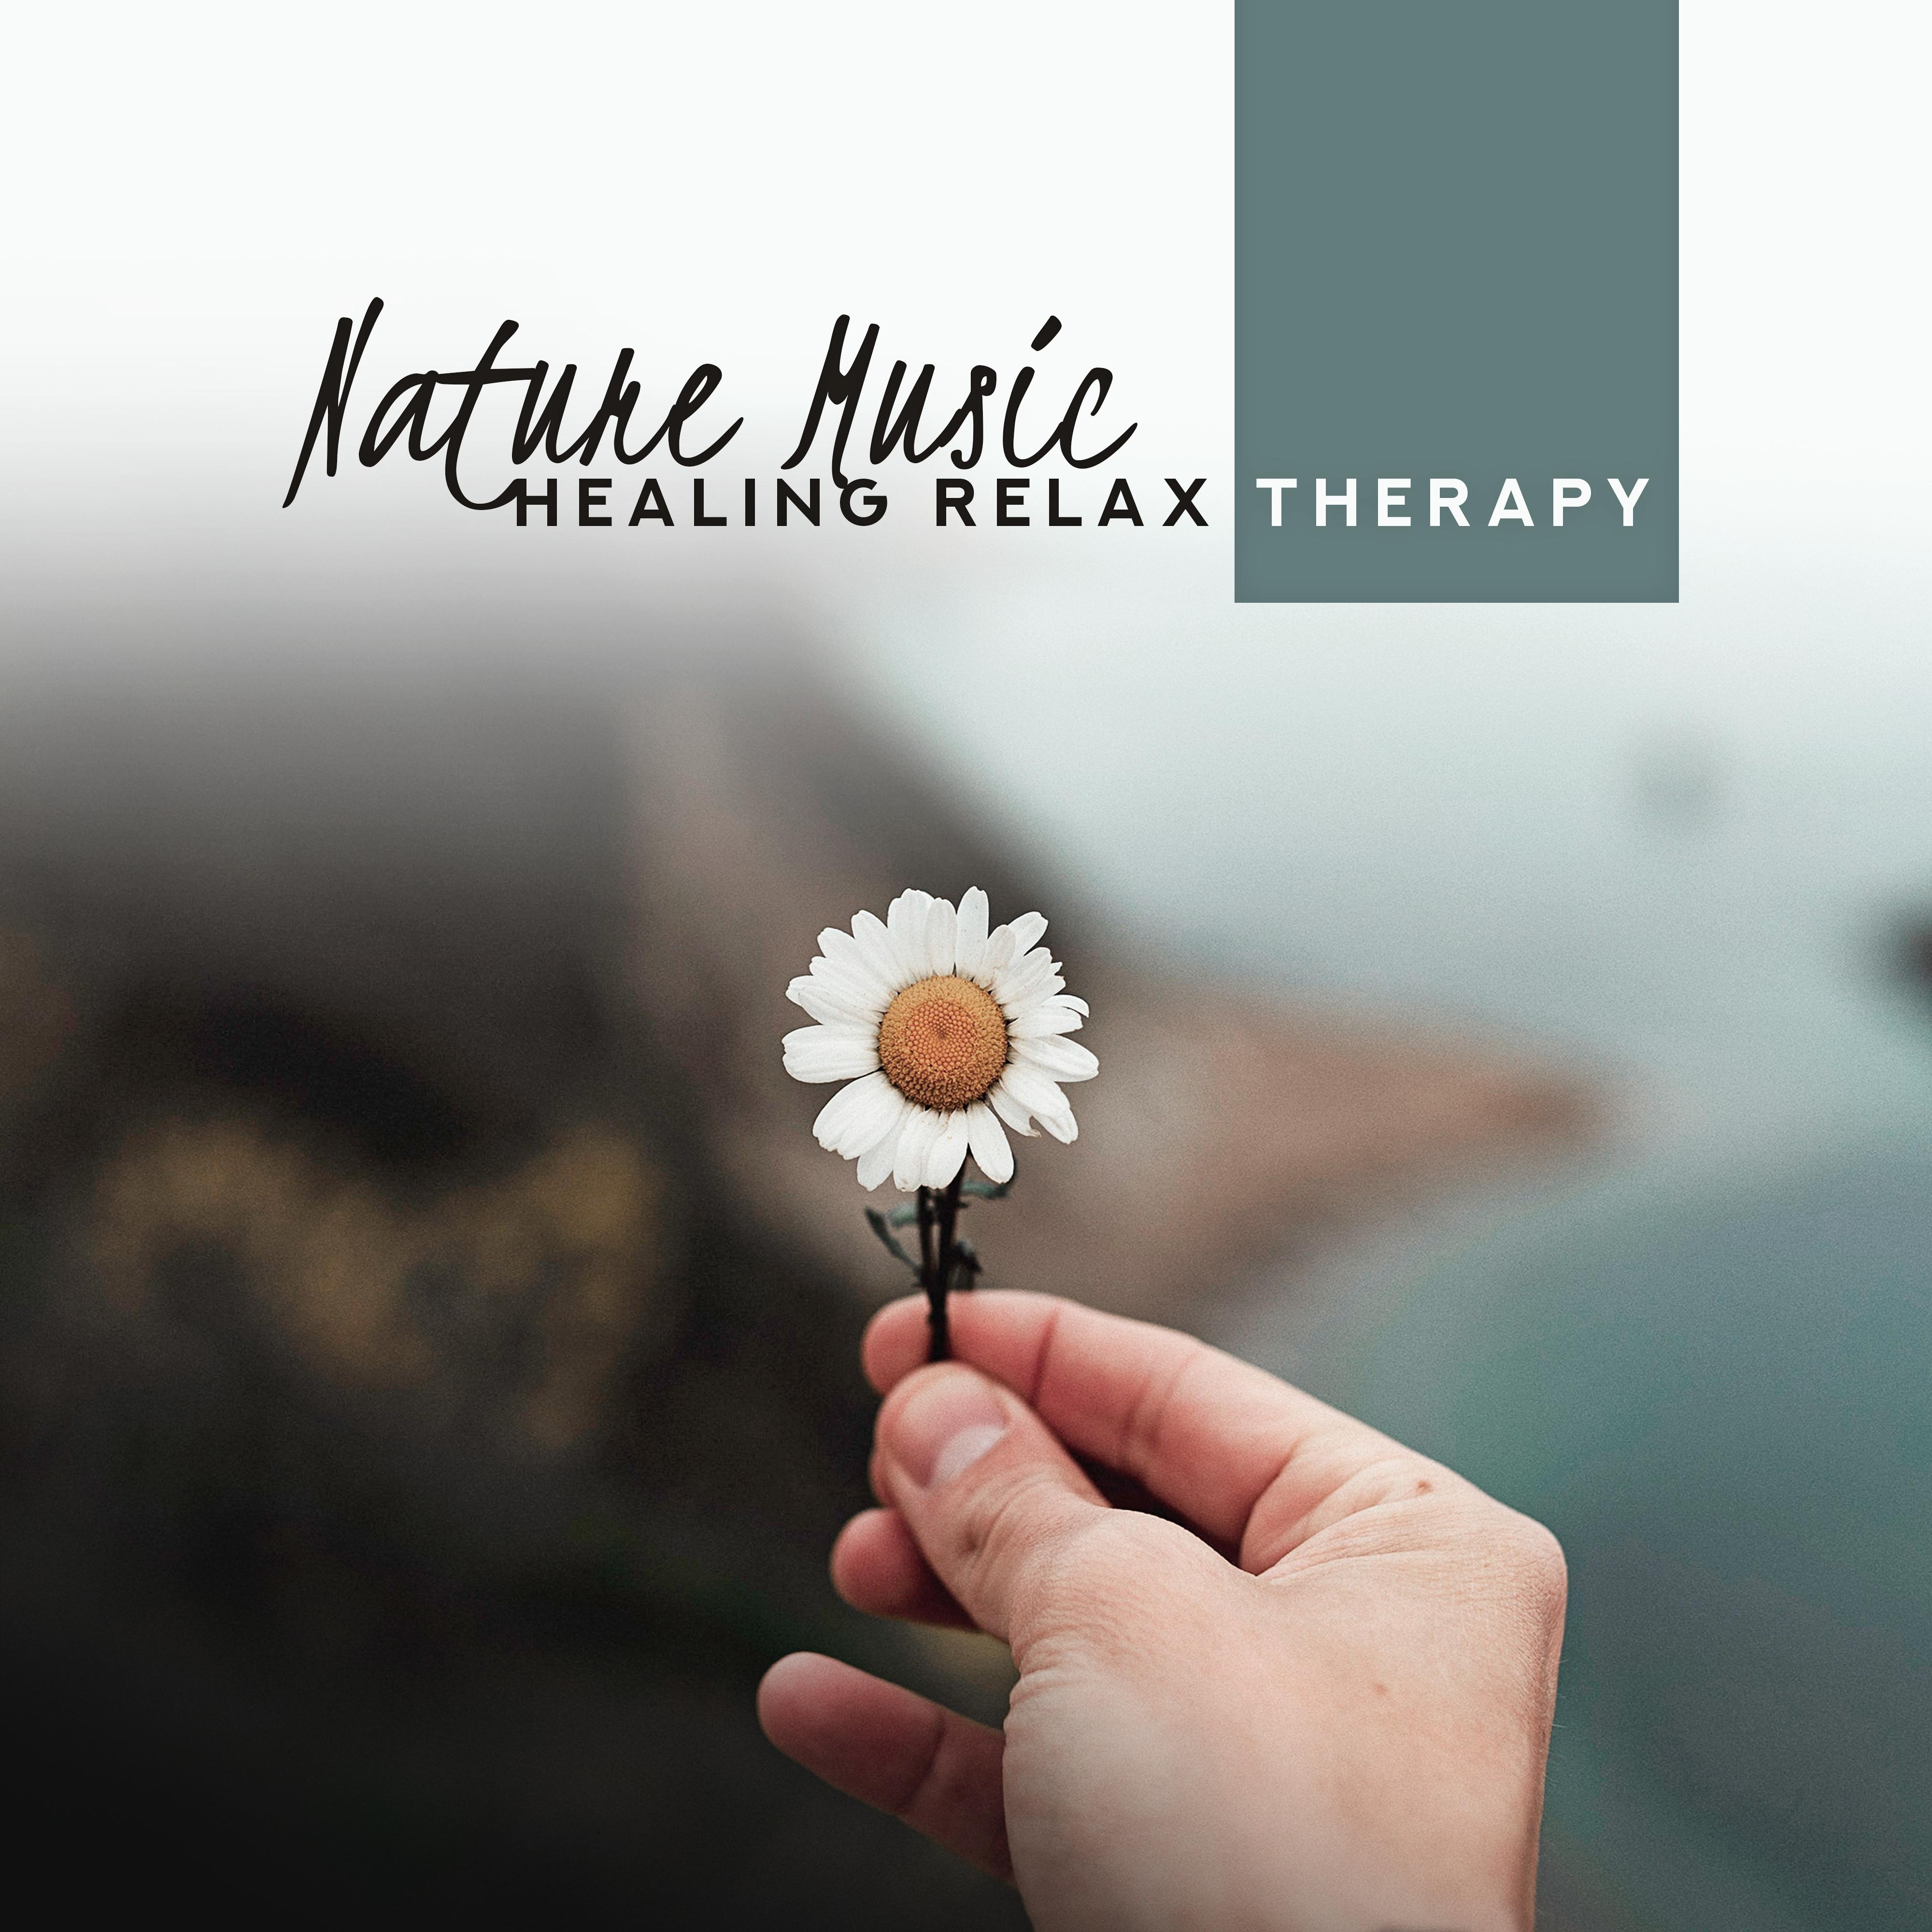 Nature Music Healing Relax Therapy – 2019 New Age Nature Sounds for Total Relaxation, Calming Down, Fight with Stress & Anxiety, Perfect Rest After Tough Day